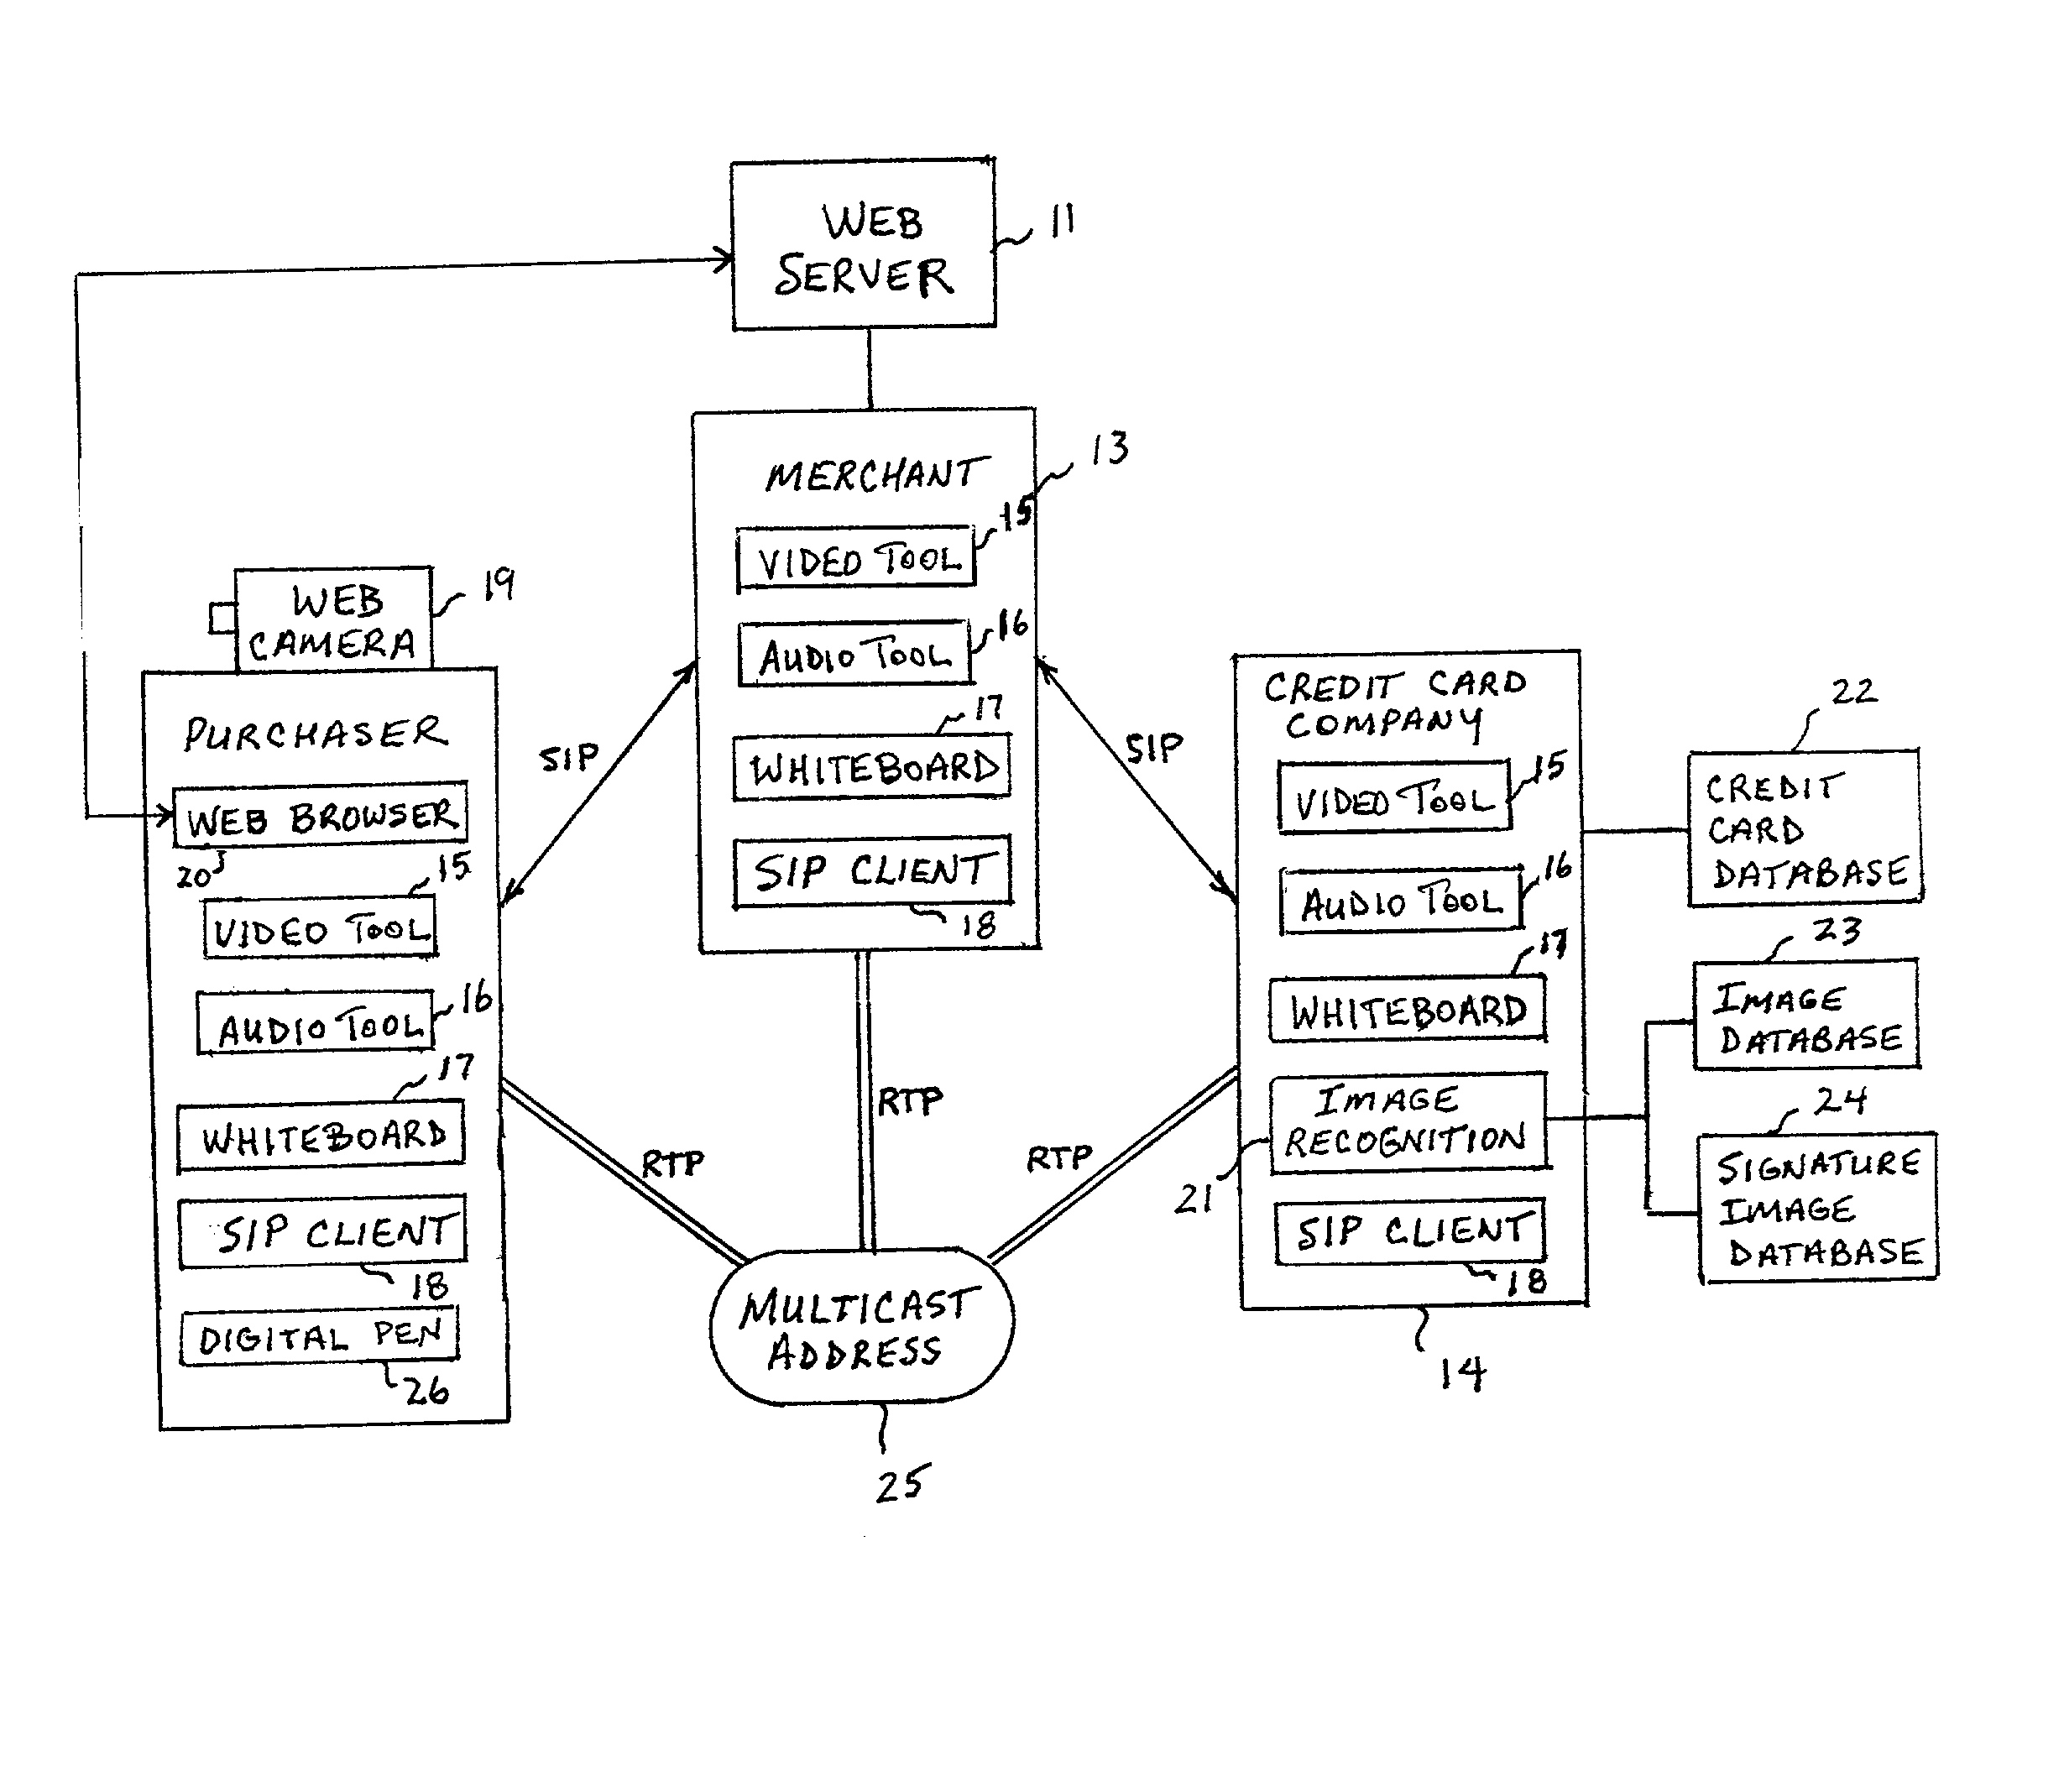 System and method of authorizing an electronic commerce transaction